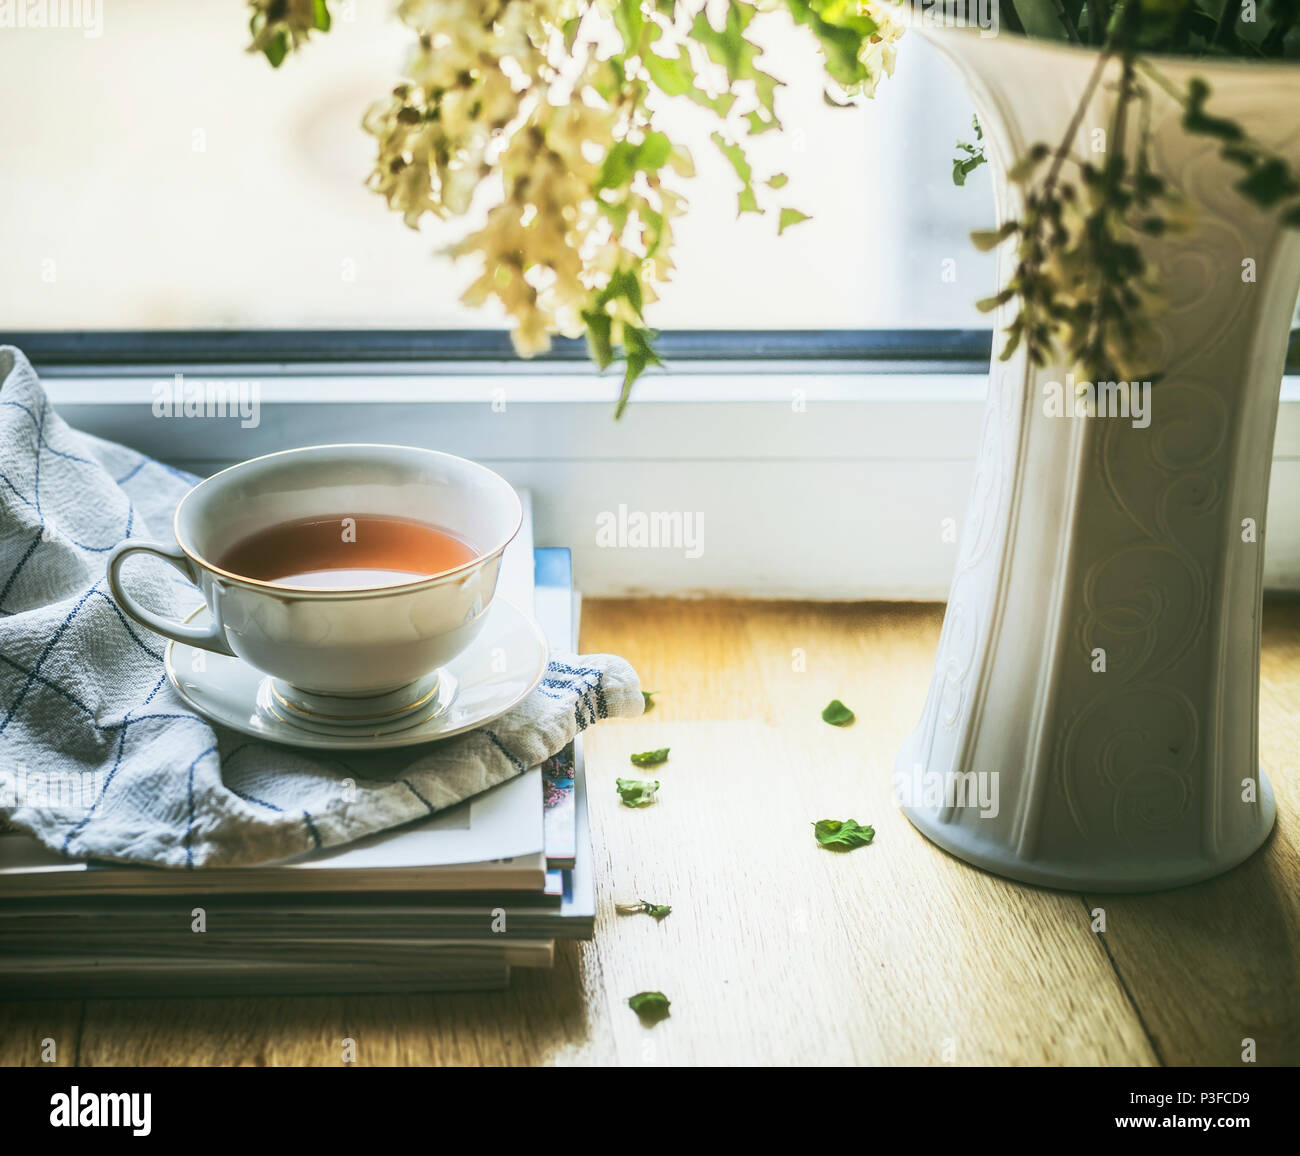 Cup of tea on window still with vase and flowers. Summer still life. Cozy home scene Stock Photo